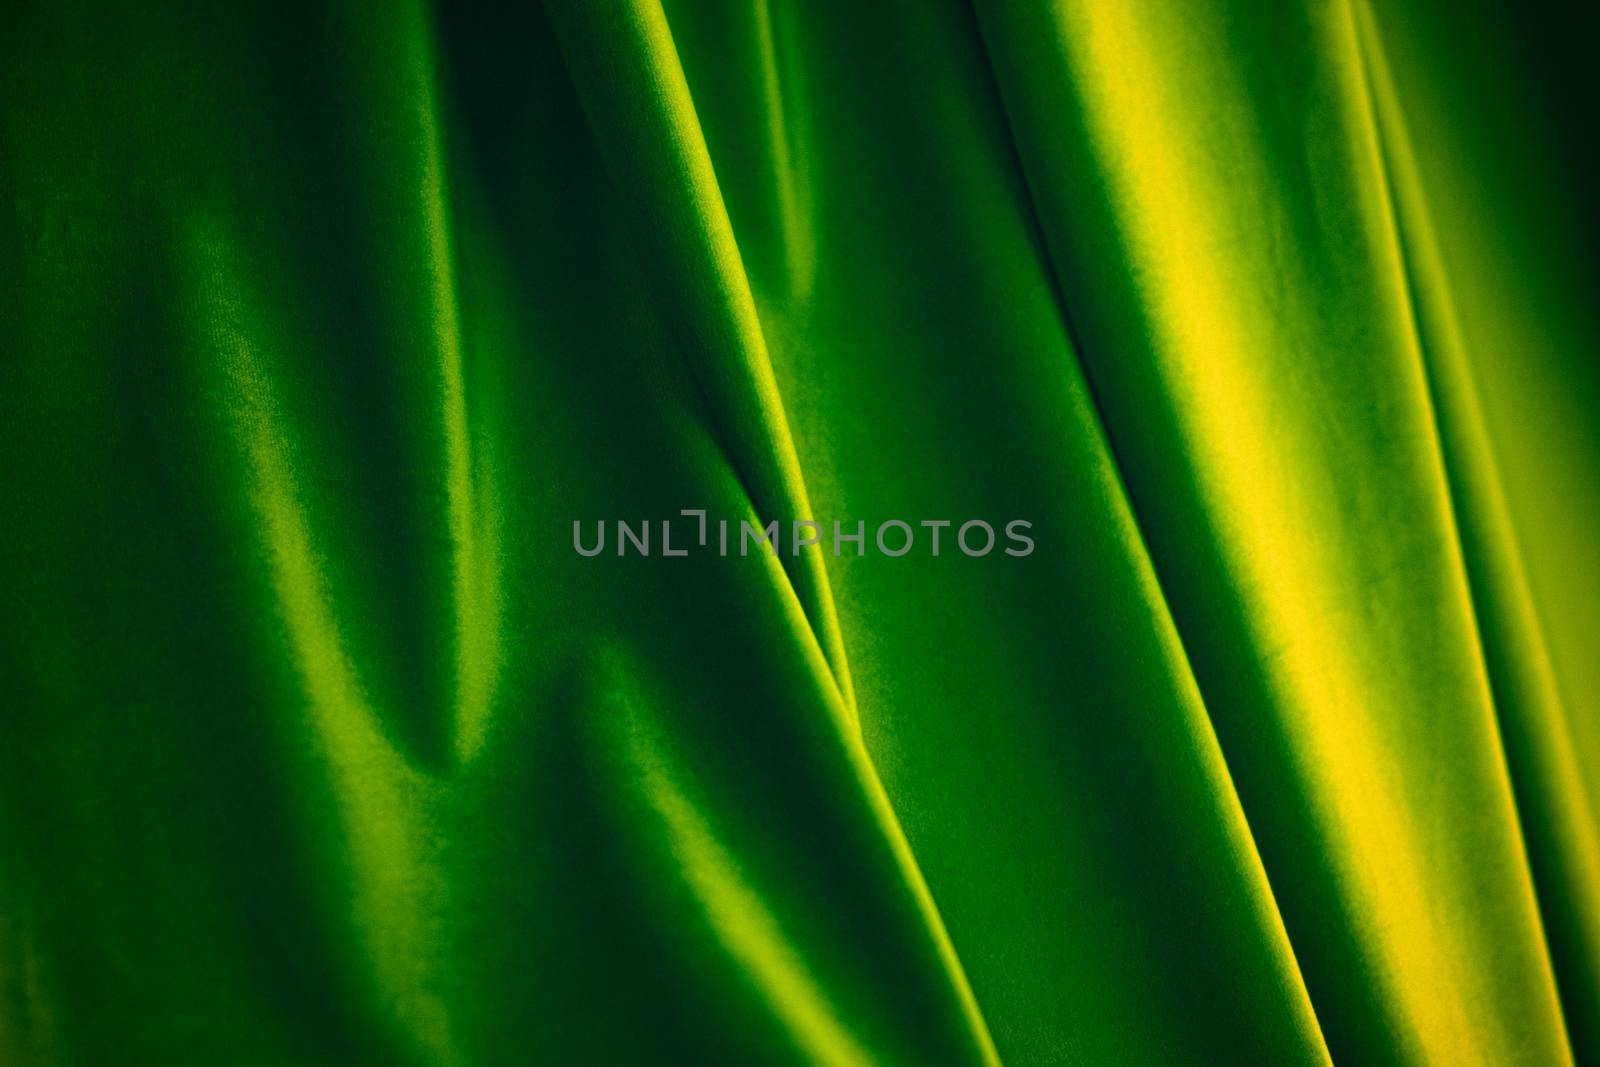 Decoration, branding and surface concept - Abstract green fabric background, velvet textile material for blinds or curtains, fashion texture and home decor backdrop for luxury interior design brand